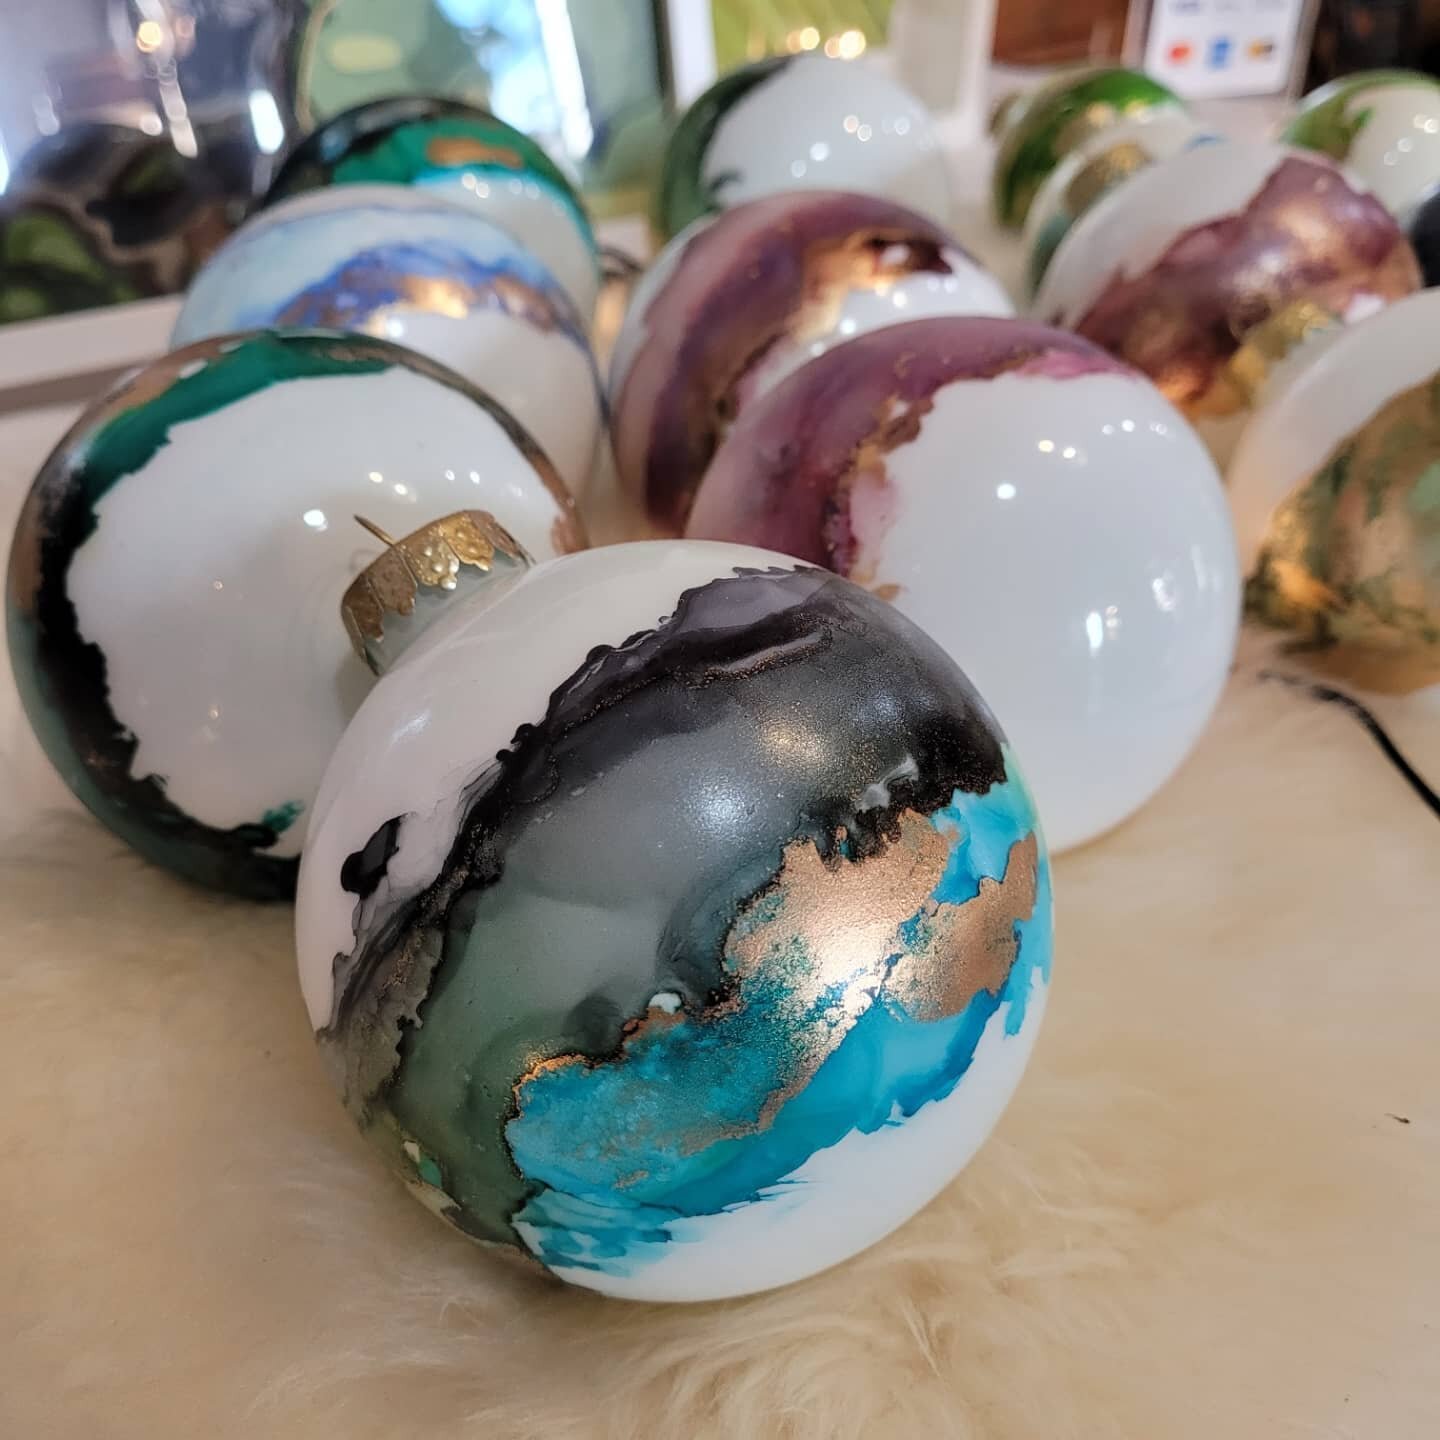 Ornaments to drop onto my site after the show. 
DM me If something catches your eye first!
Large $15
X-large $20
Alcohol ink on glass.
Www.beautifulmessstudios.com